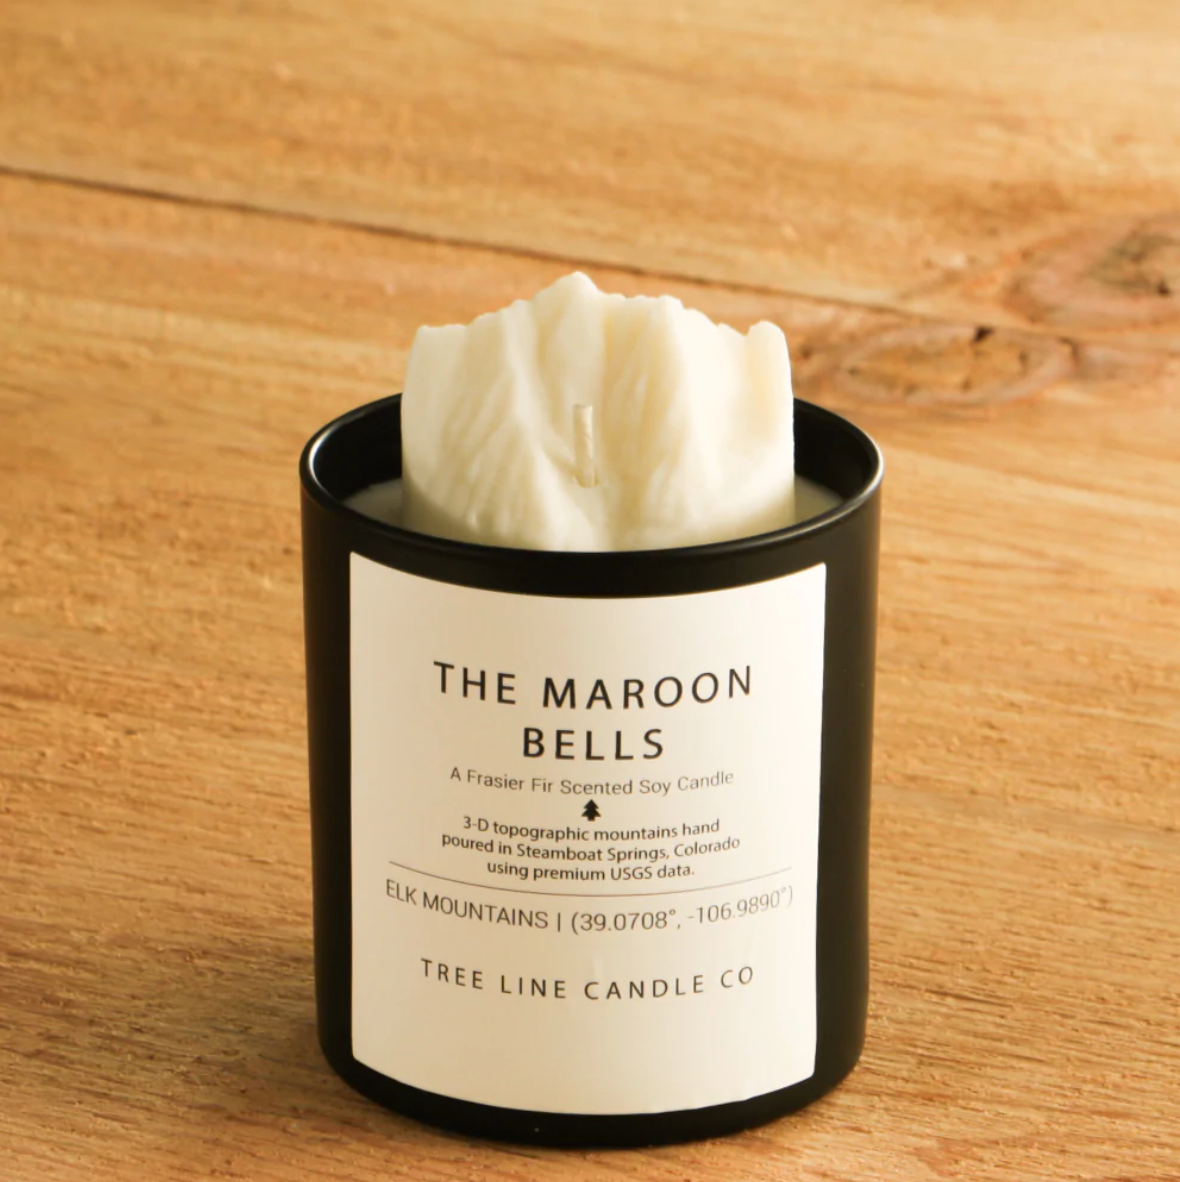 Tree Line Candle